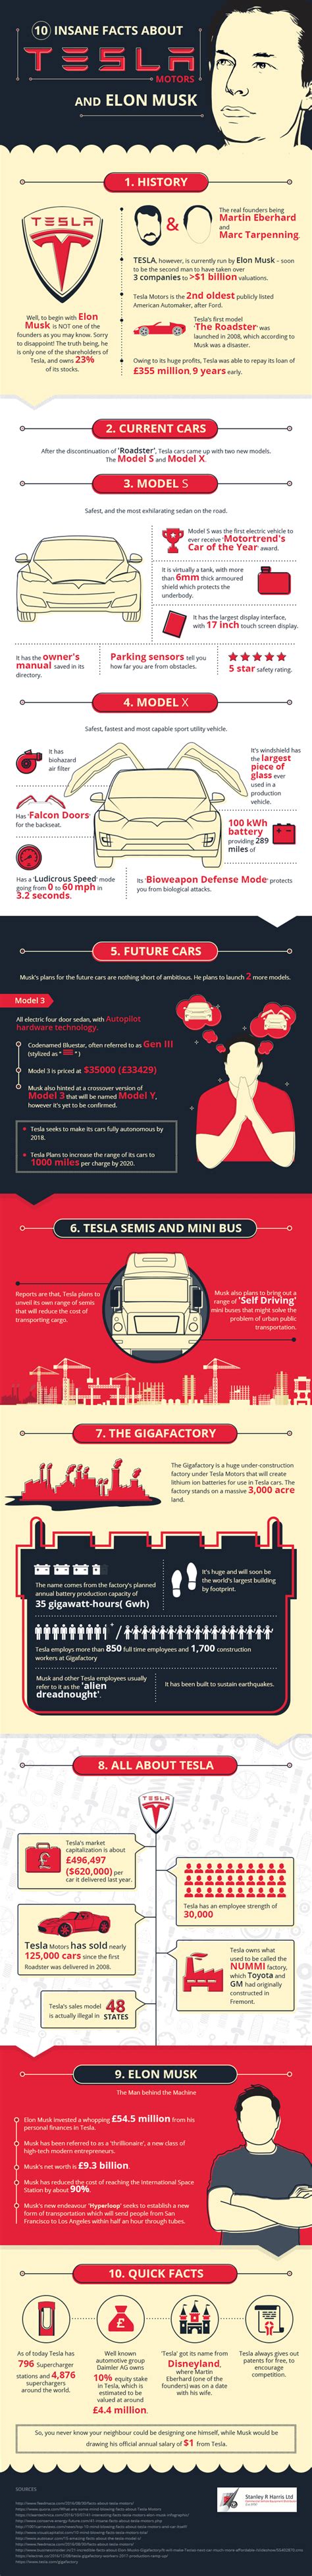 10 Interesting Facts About Tesla Motors Daily Infographic